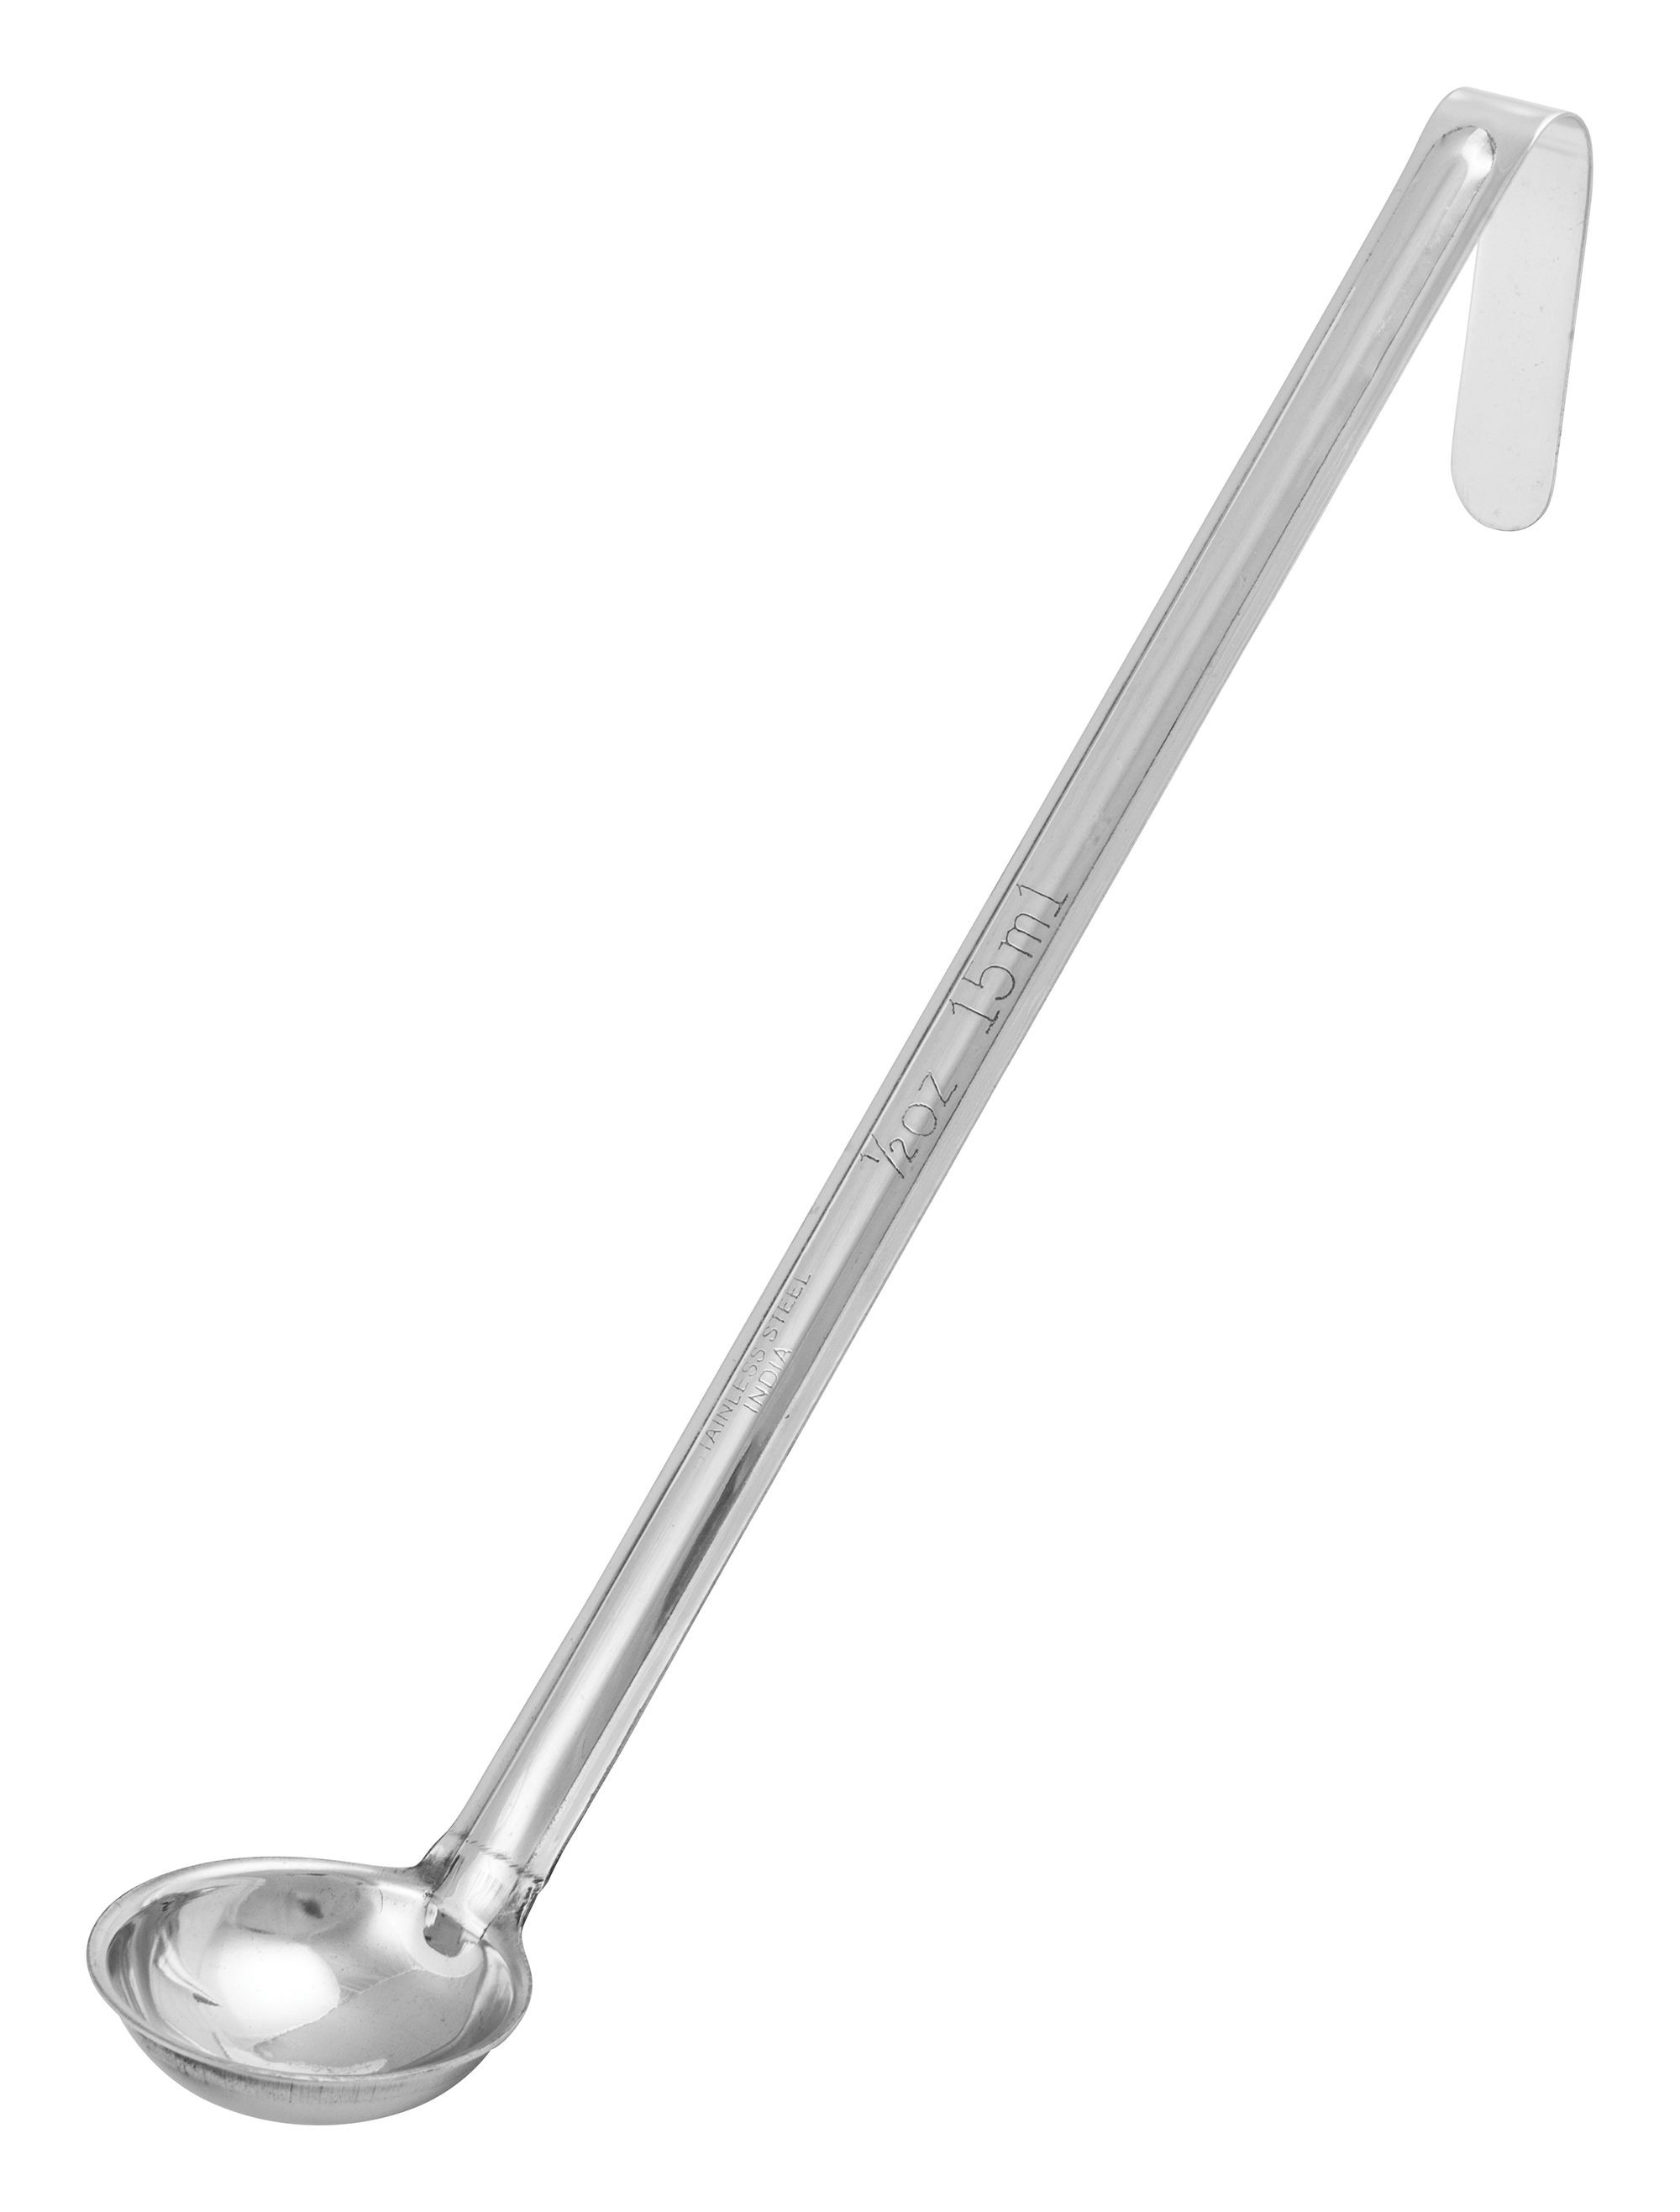 Winco LDI-0 One-Piece Stainless Steel 1/2 oz. Ladle